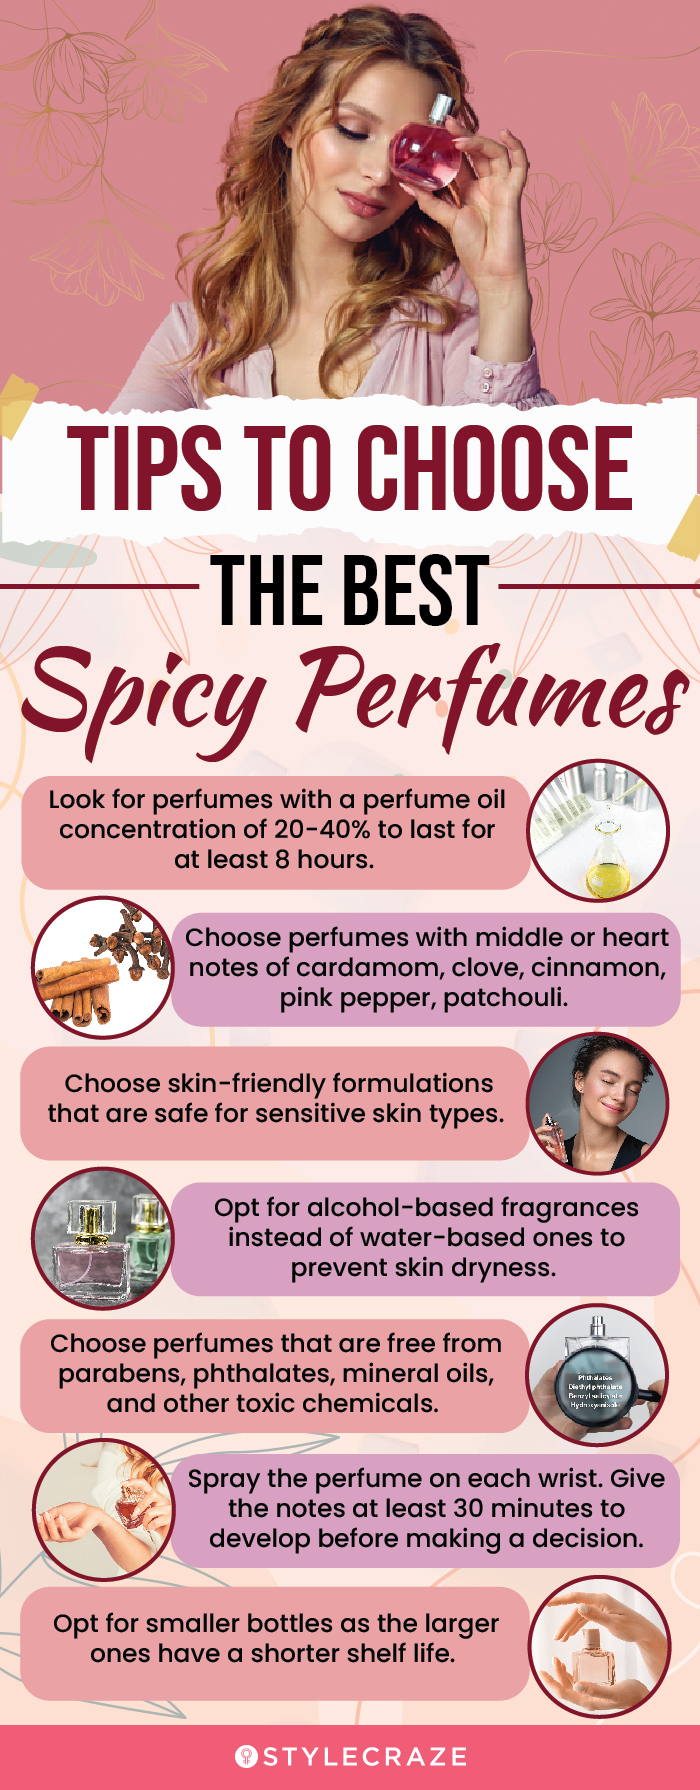 Tips To Choose The Best Spicy Perfumes (infographic)